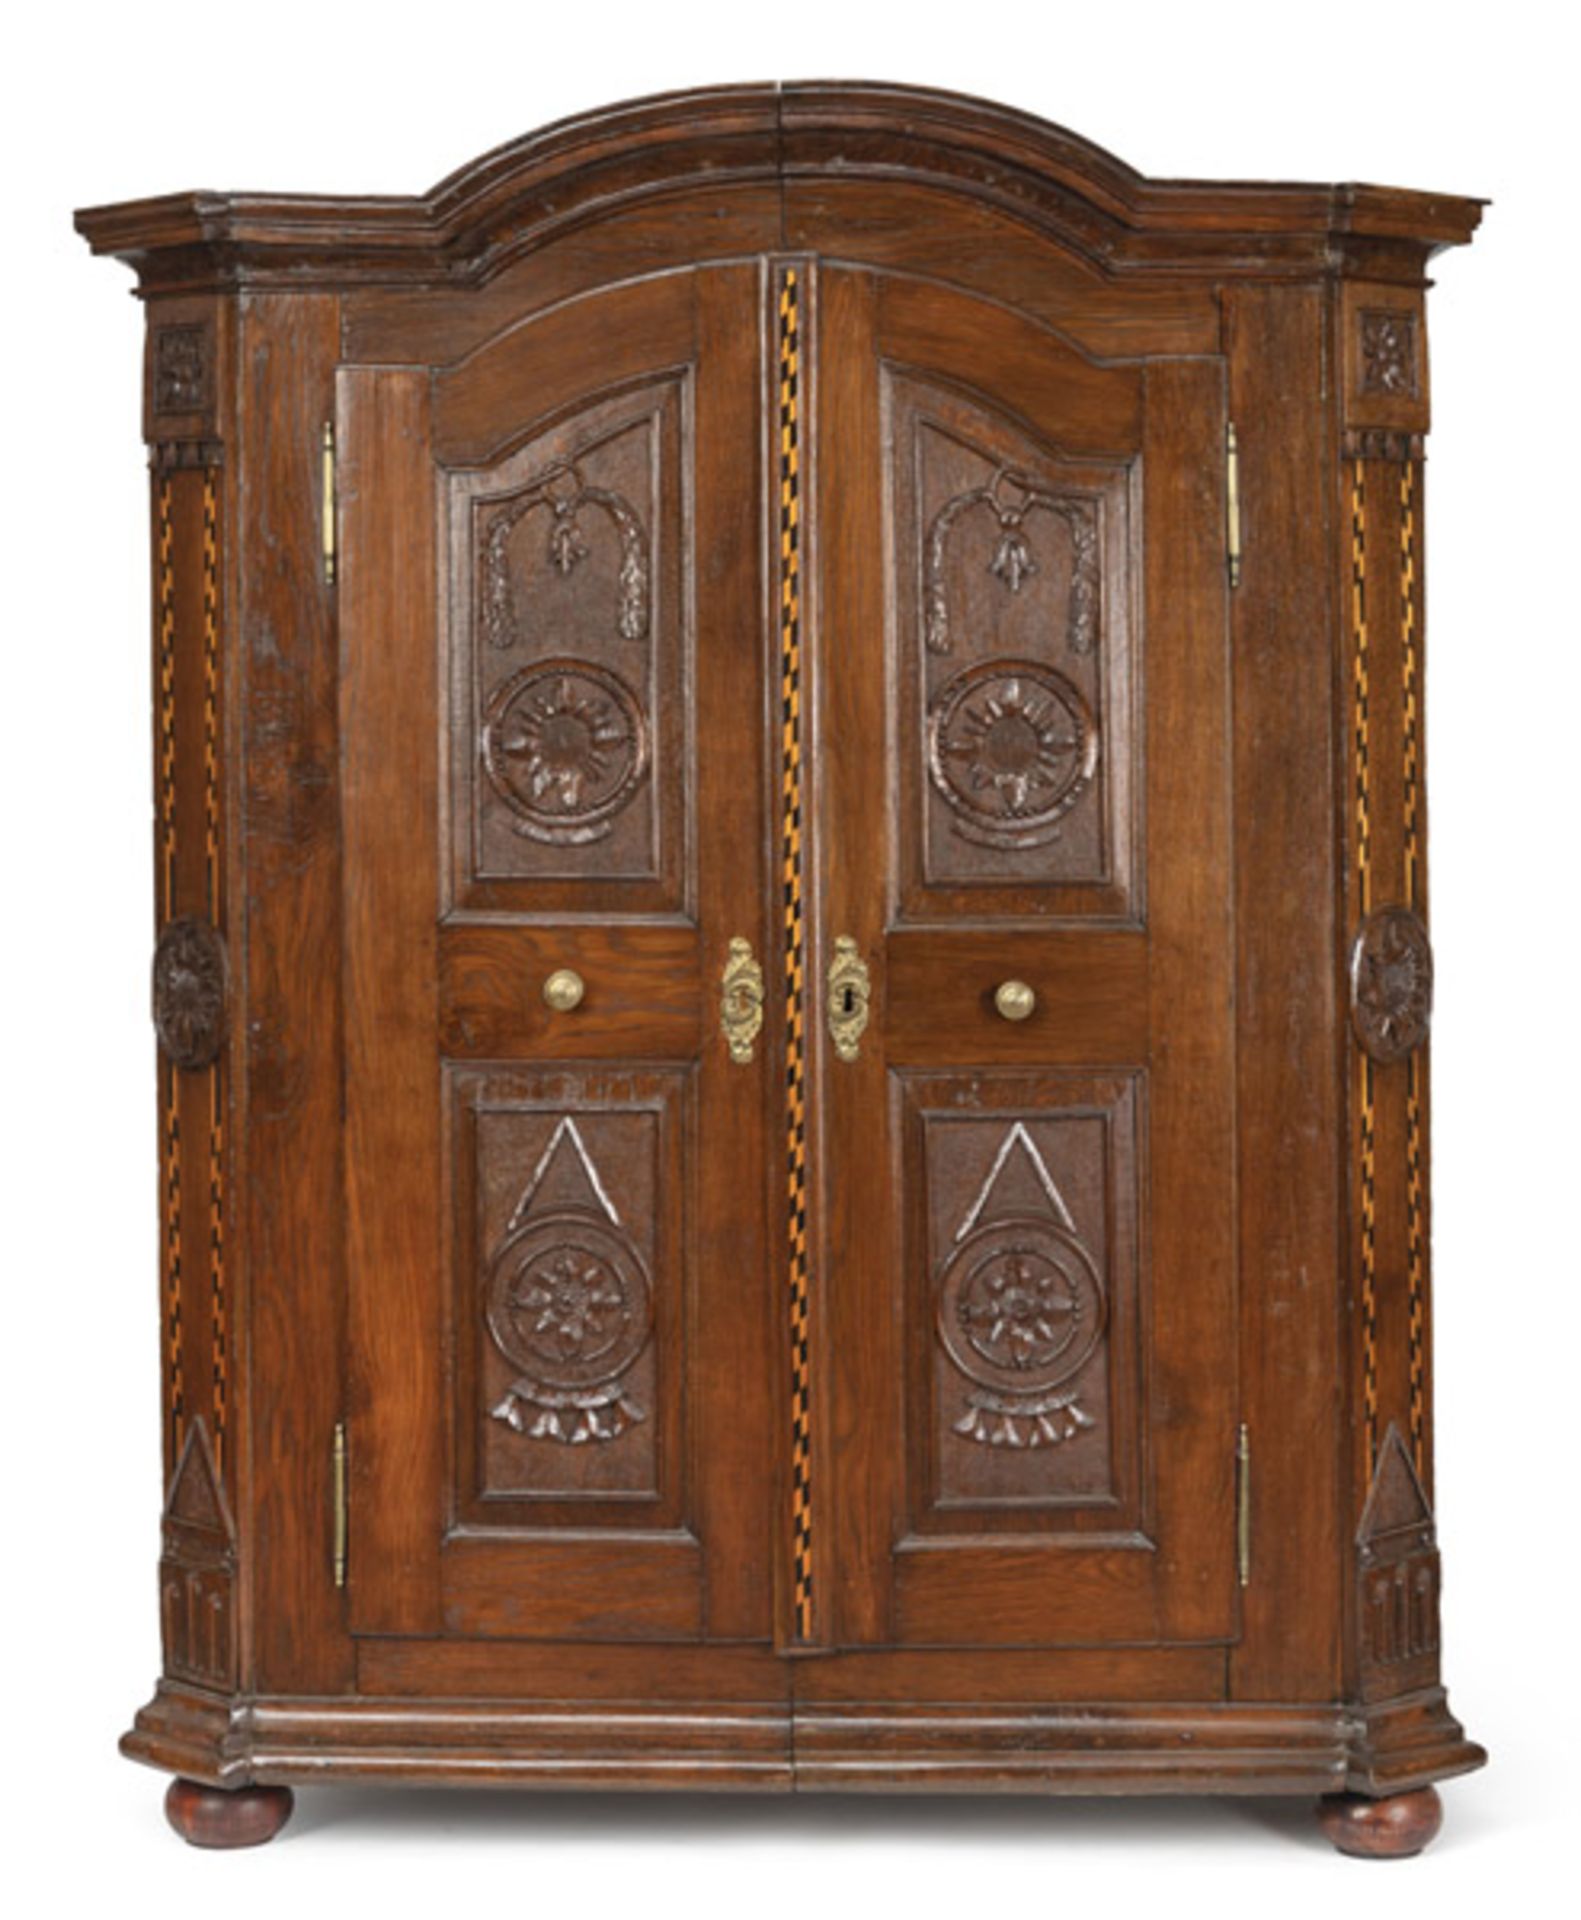 A NEOCLASSICAL BRASS MOUNTED CARVED OAKWOOD FRUITWOOD AND BOG OAK CUPBOARD - Image 2 of 6